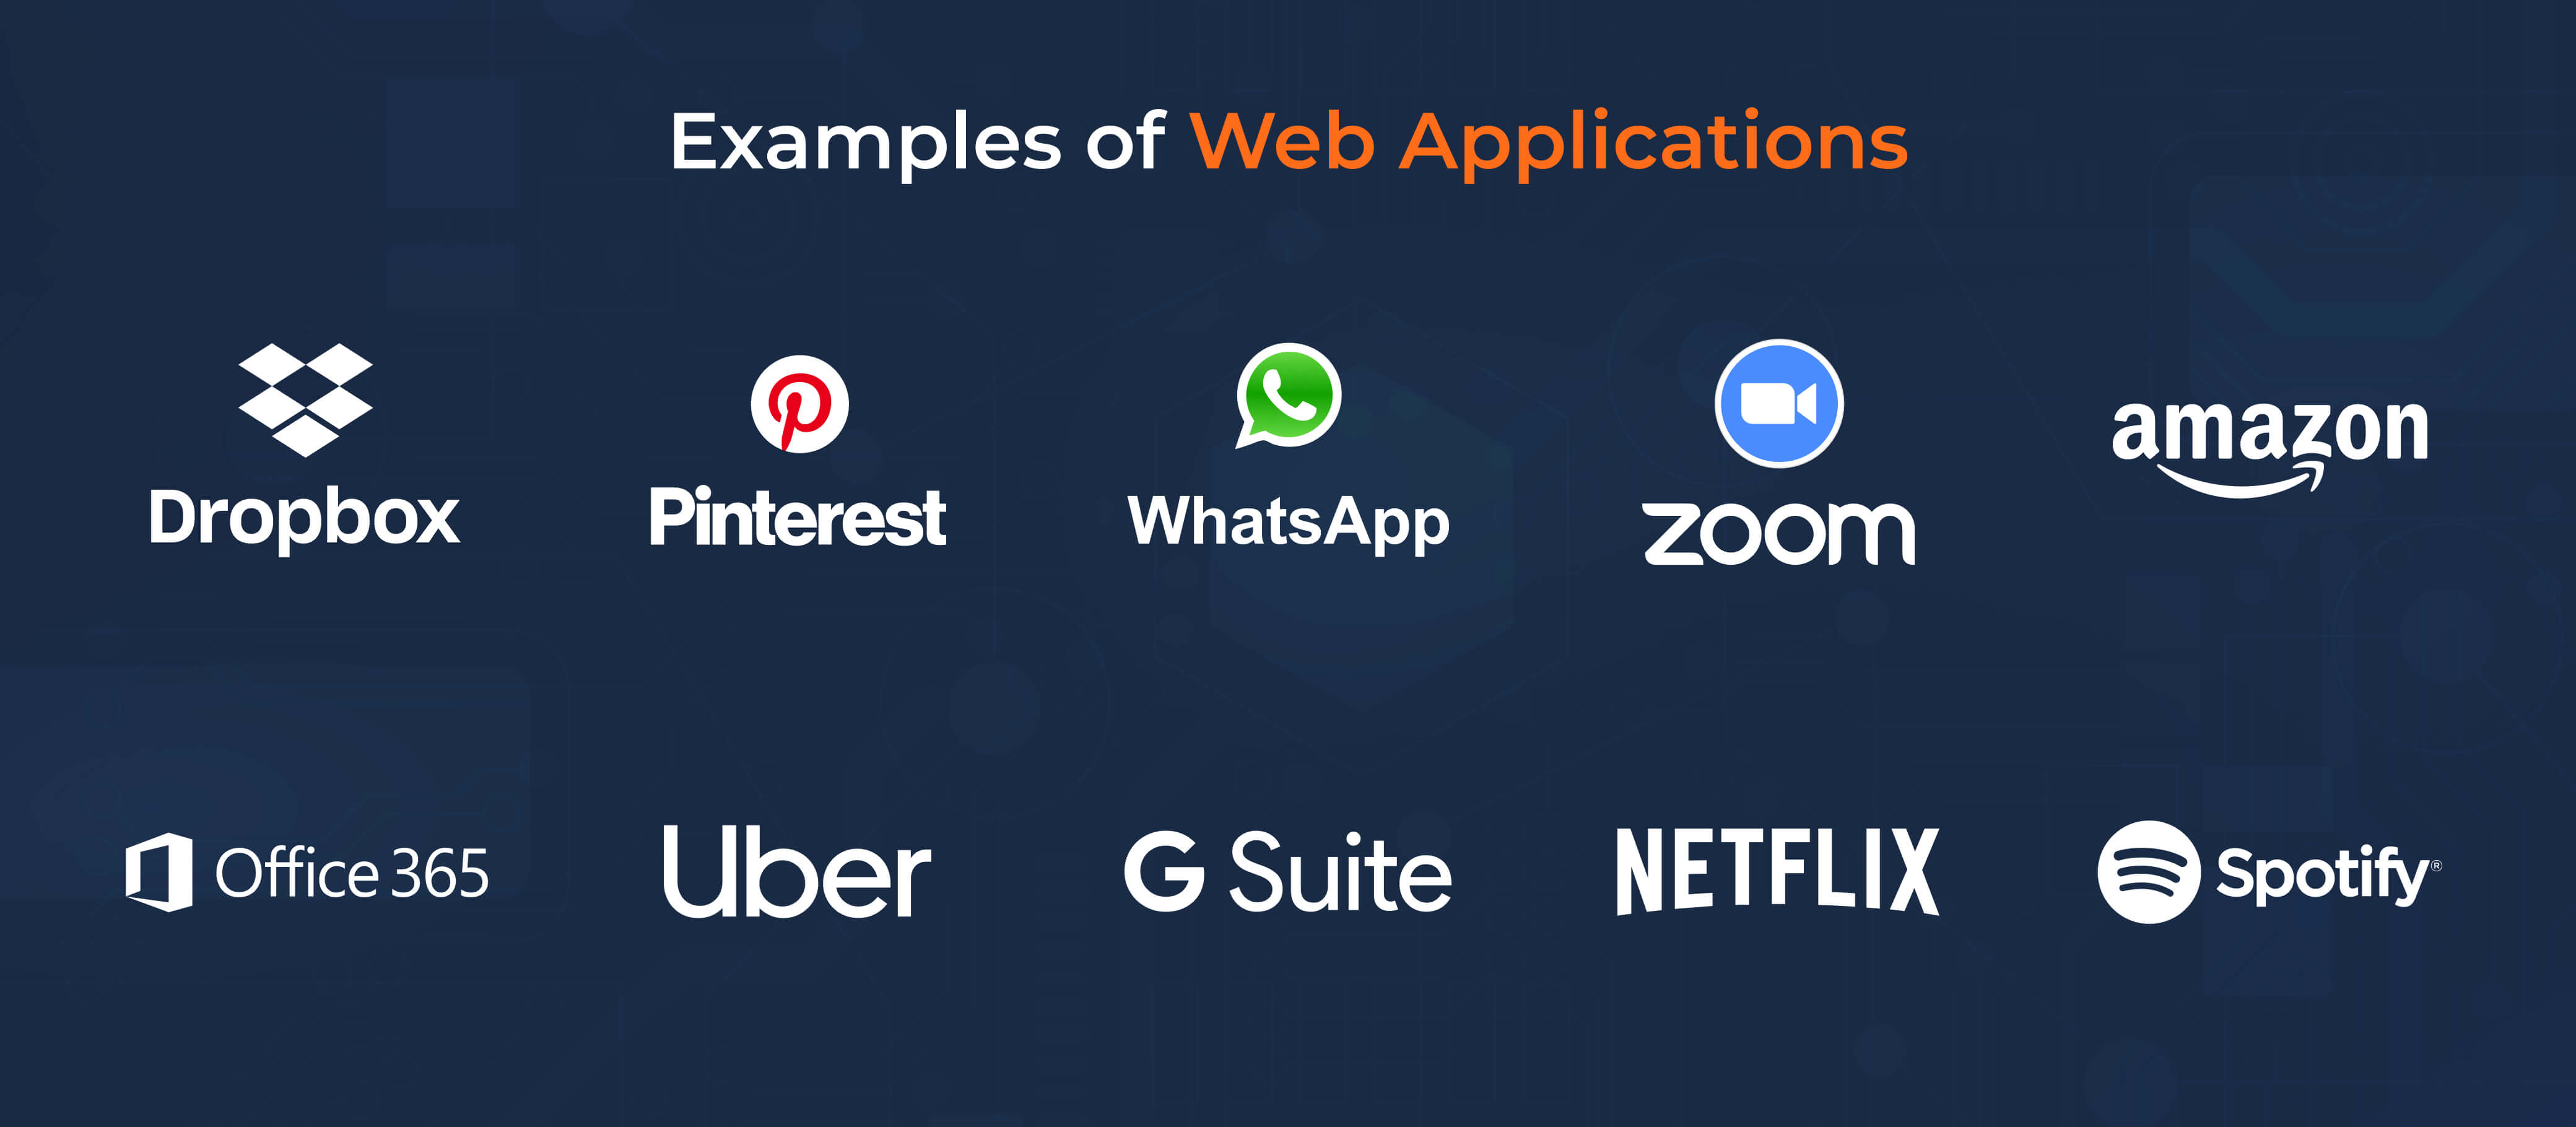 Examples of Web Applications